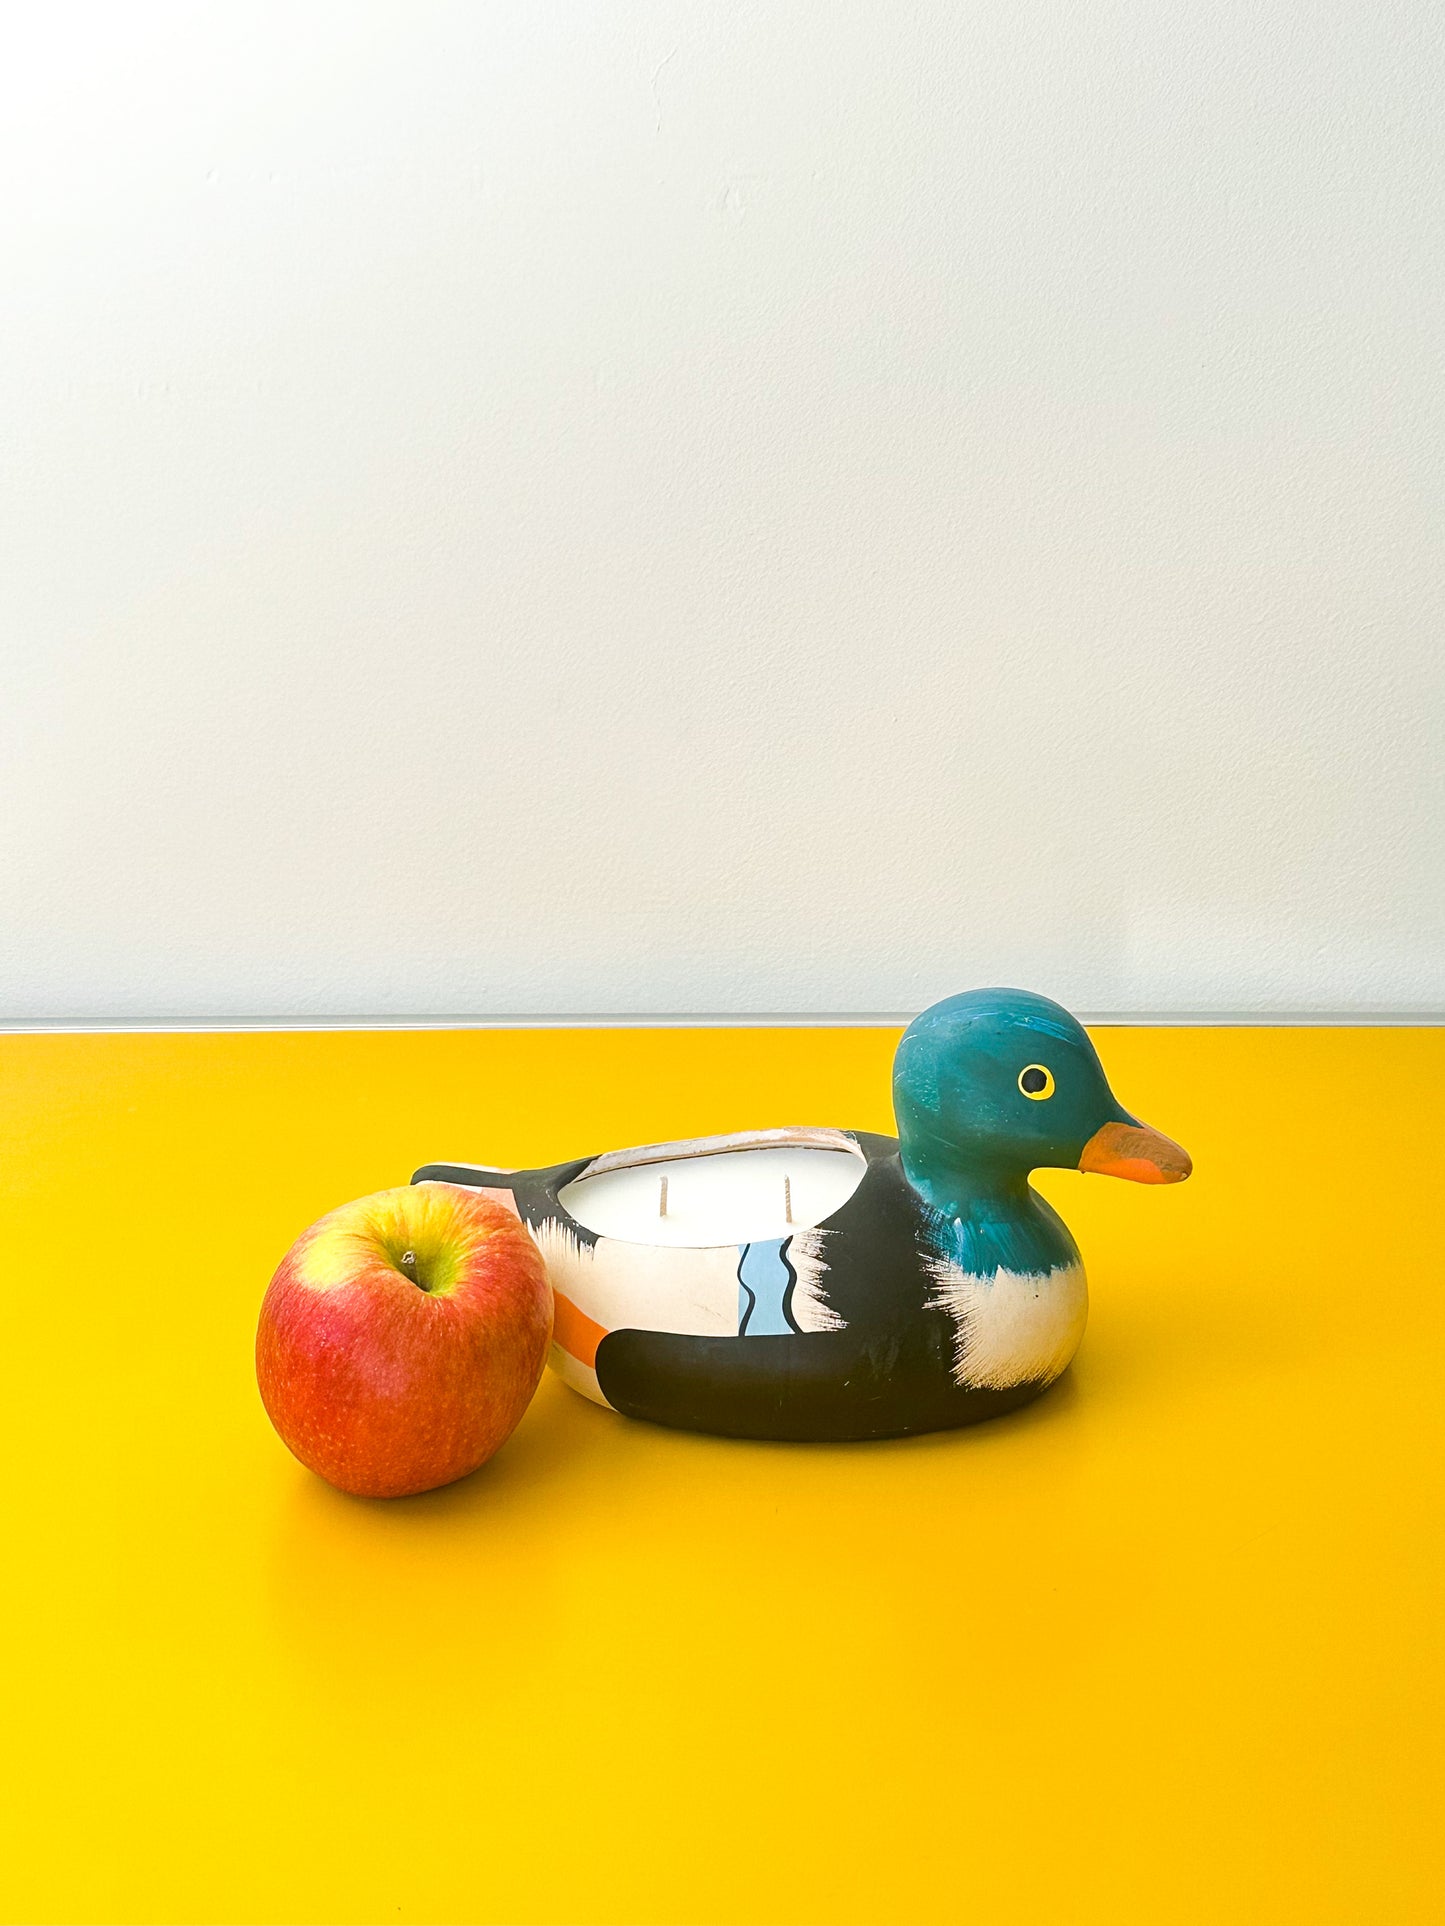 Painted Duck